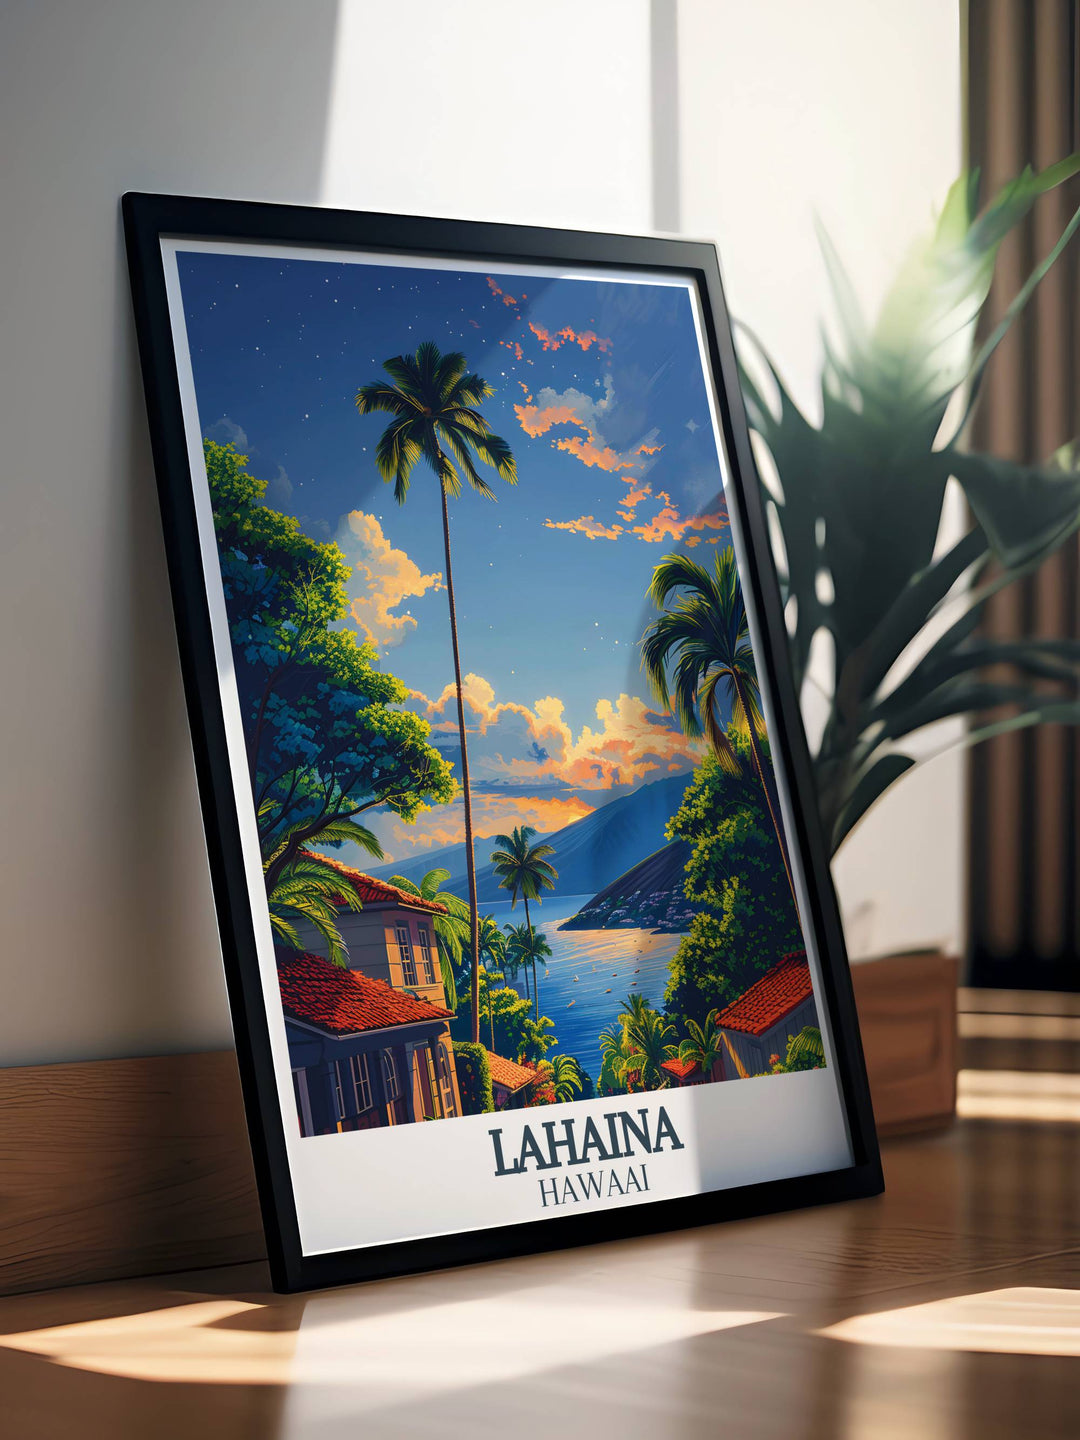 Luxurious Hawaii illustration that serves as an elegant Hawaii home decor piece, offering a glimpse into Lahaina’s picturesque beaches and vibrant street scenes.